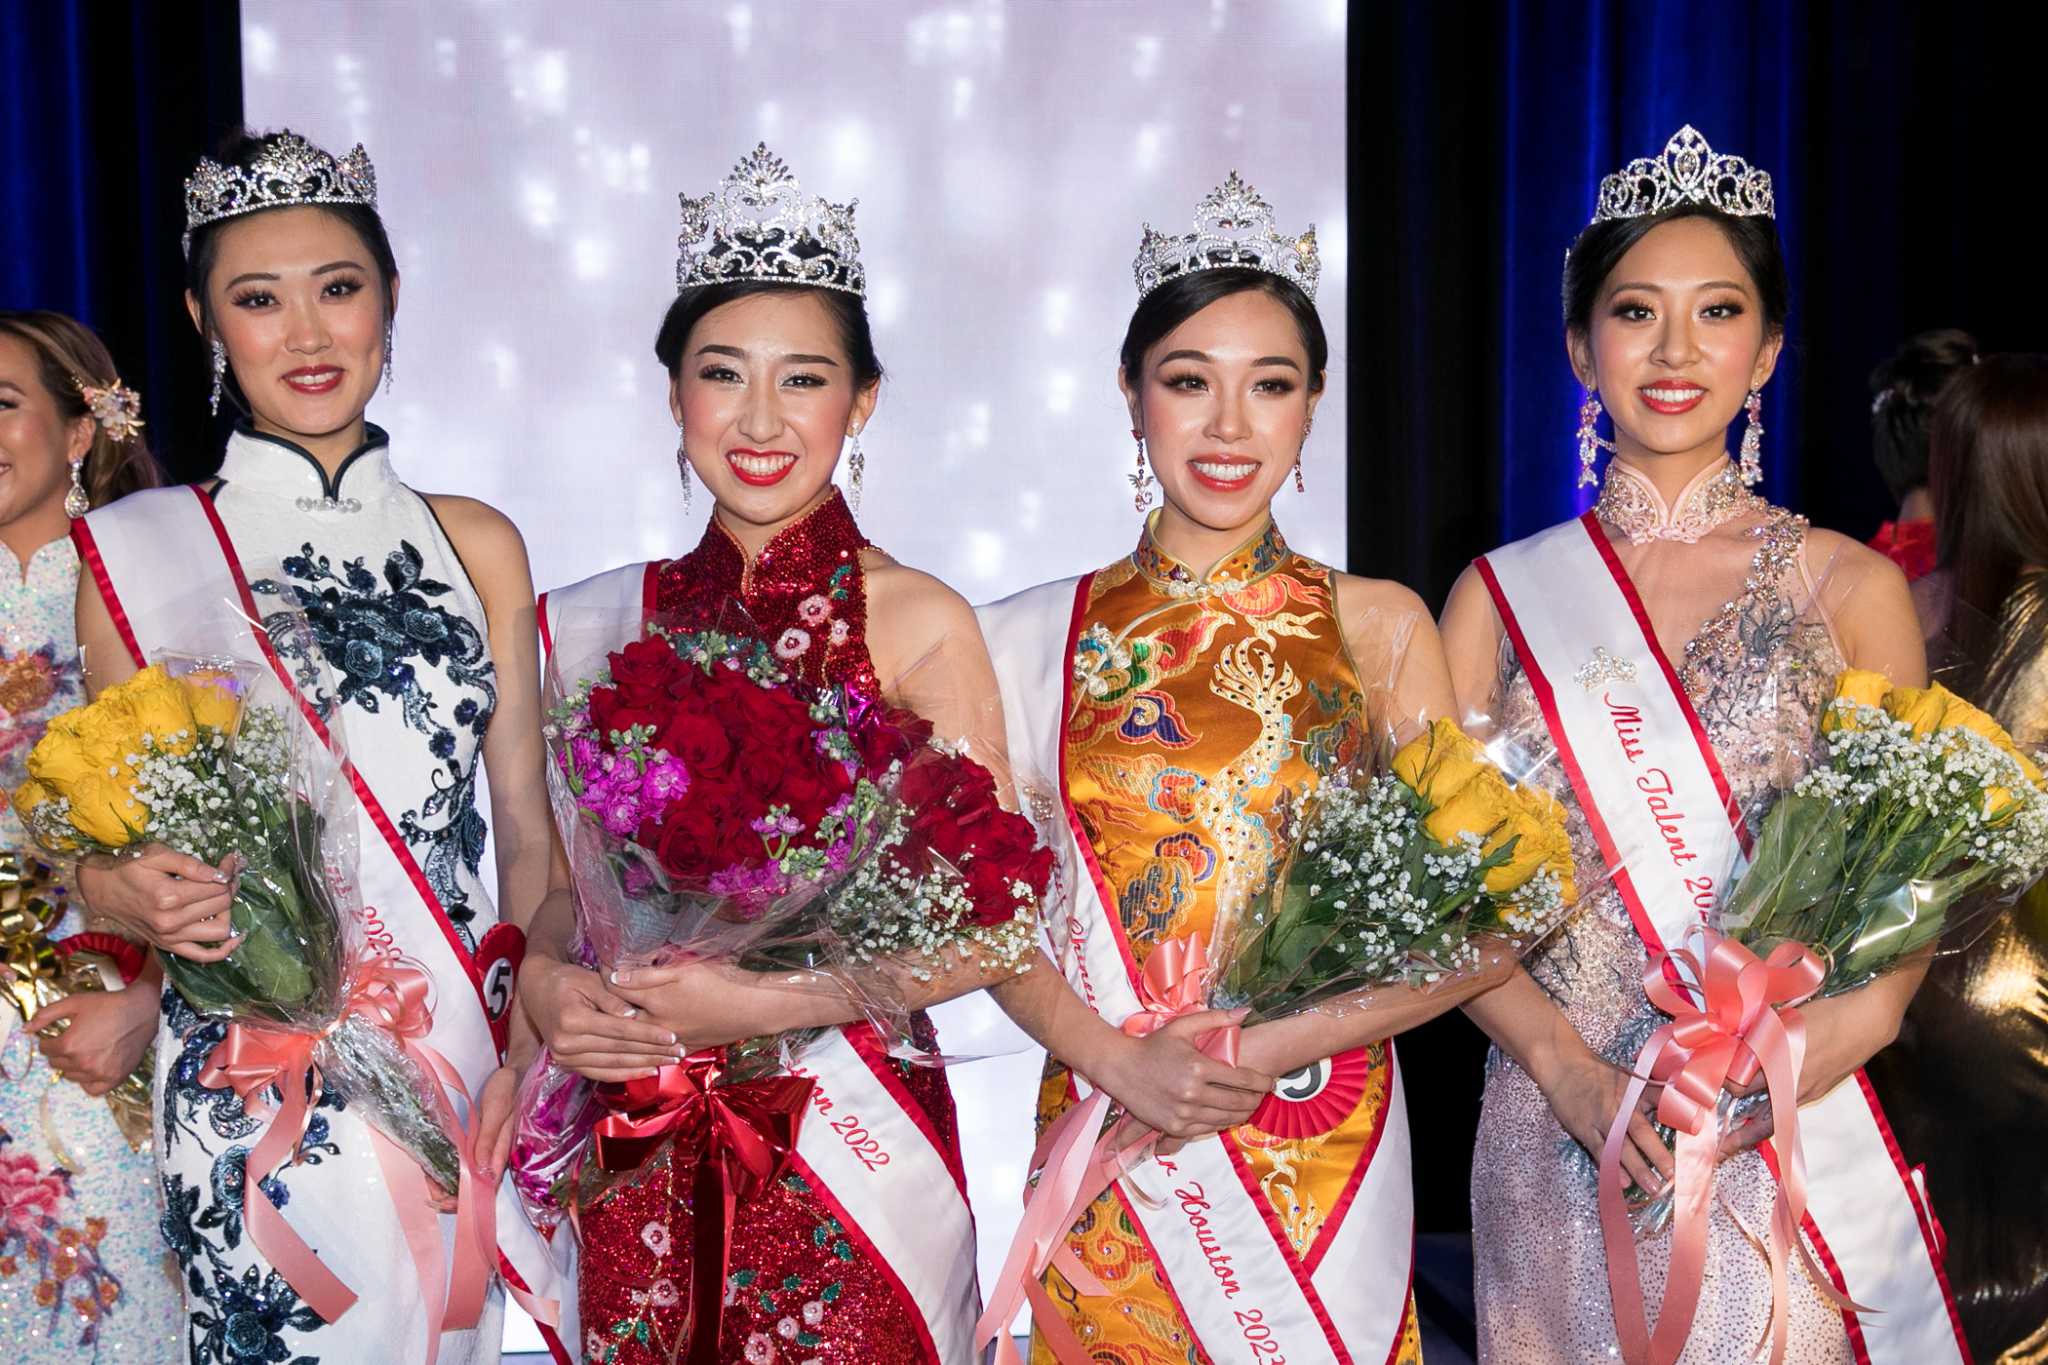 Miss Chinatown Houston pagent celebrates city's Chinese culture